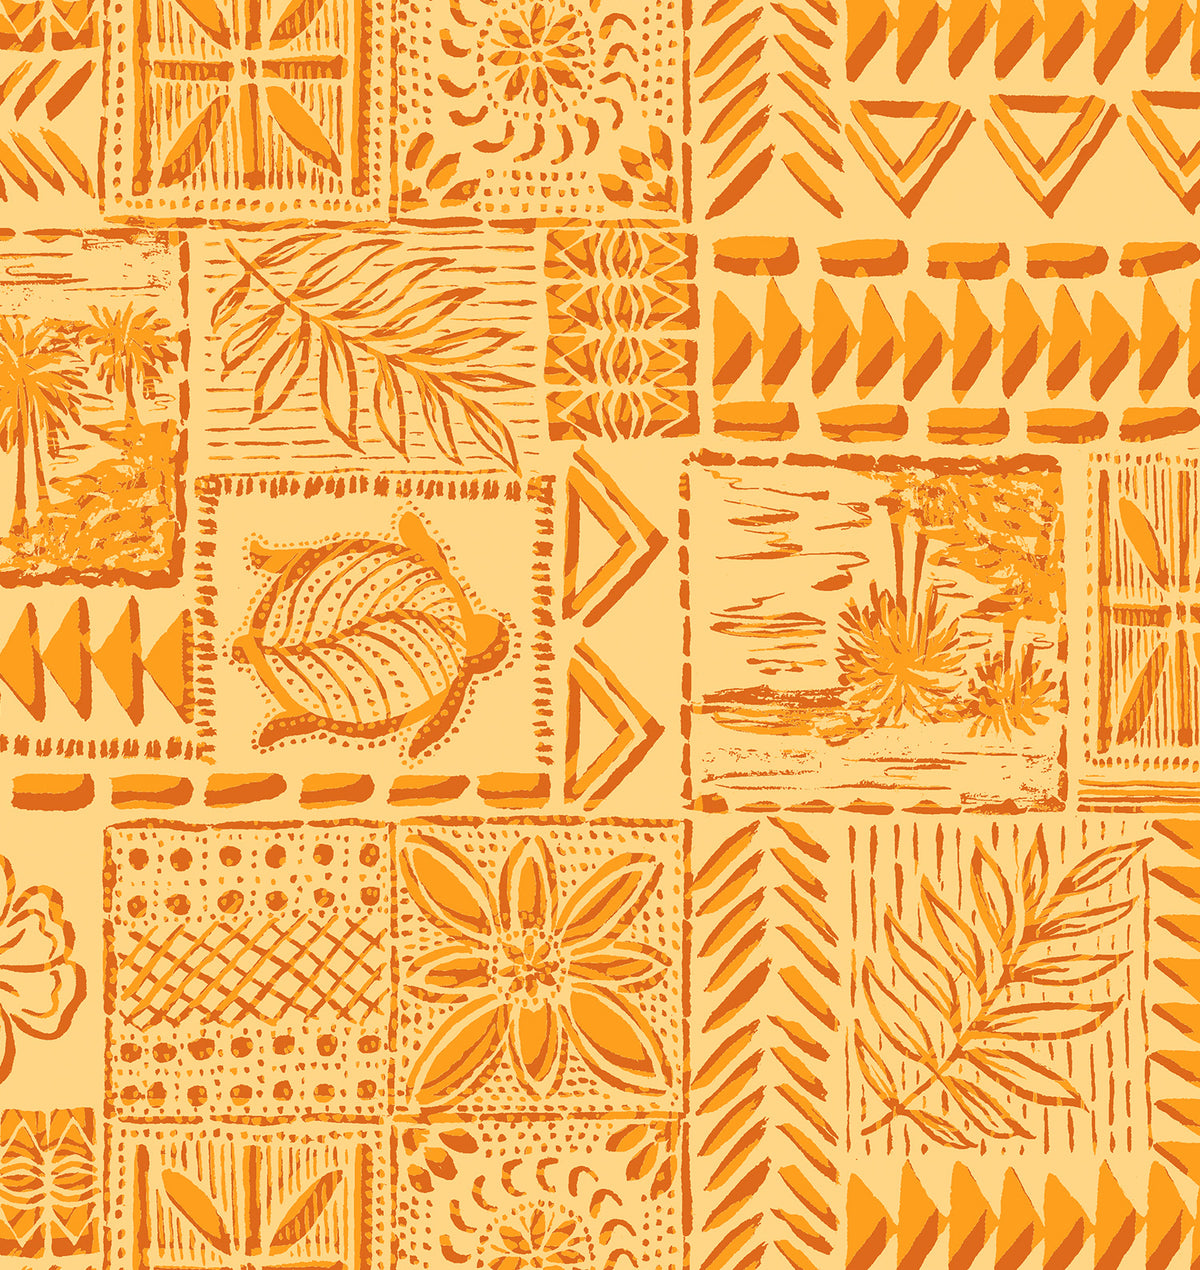 Swim Systems Playa Hermosa vintage Hawaiian-inspired print on a Honey Bay (pale yellow) background, made from recycled fabric